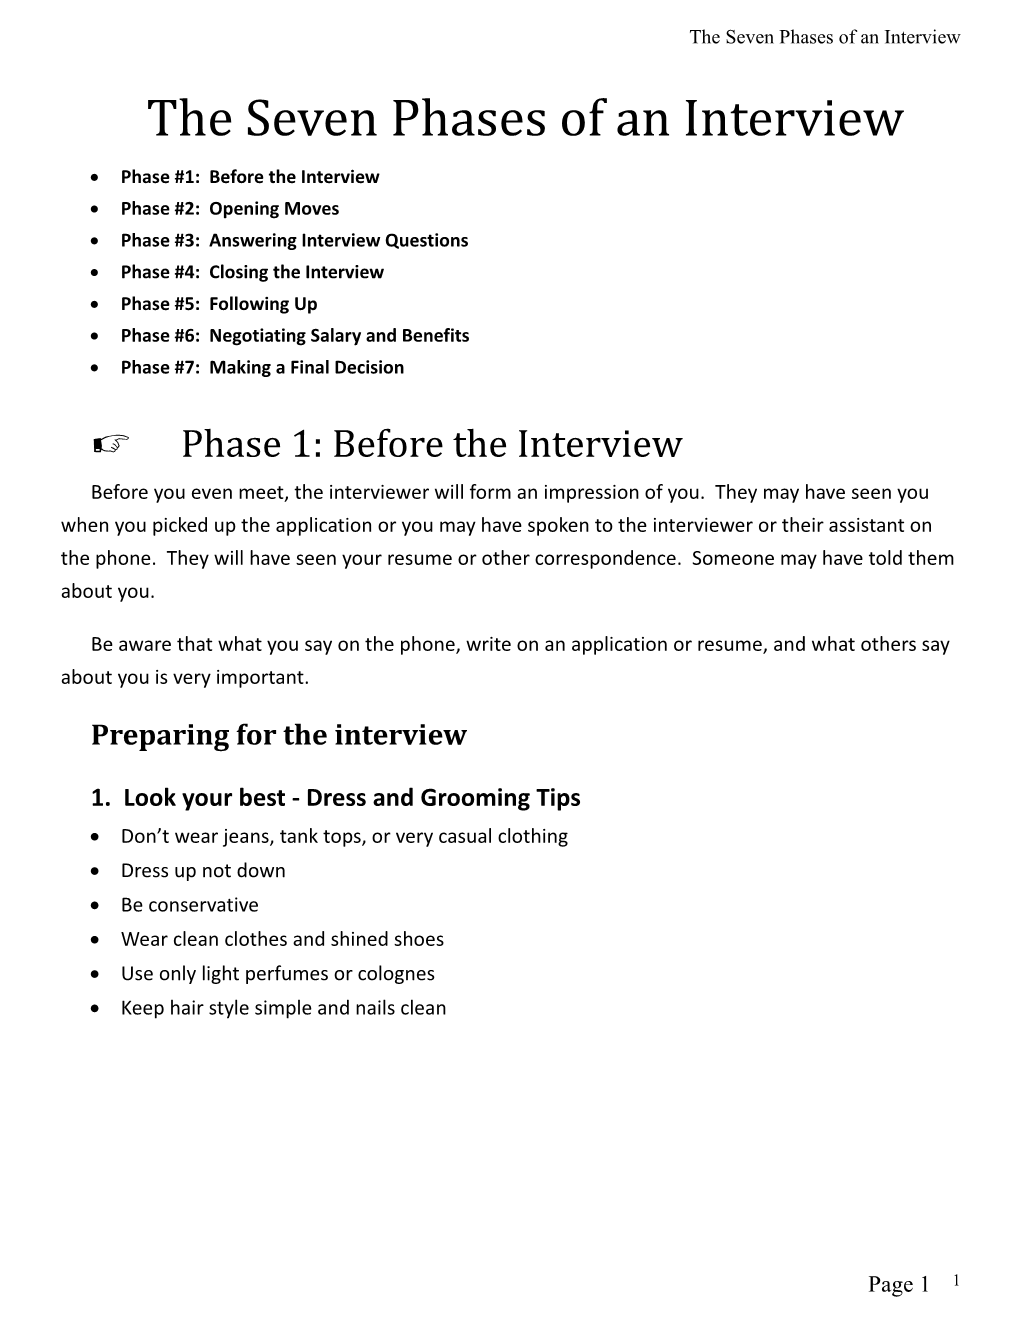 The Seven Phases of an Interview